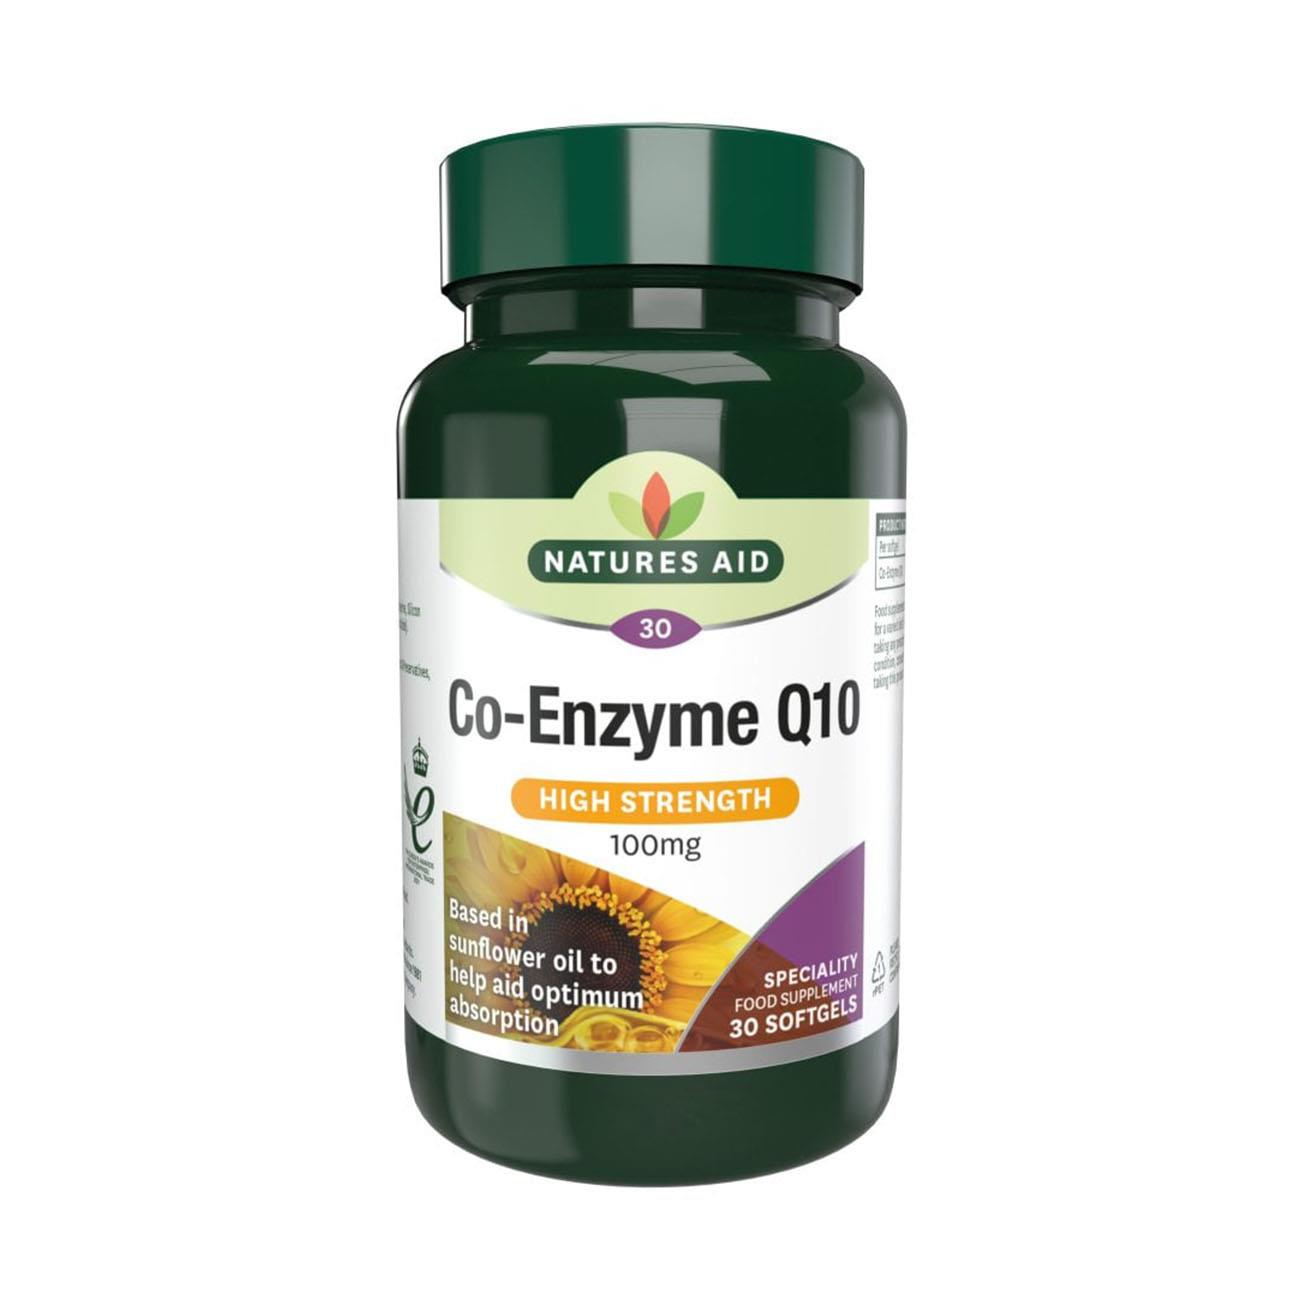 Co-Enzyme Q10 High Strength 100mg 30 Softgels